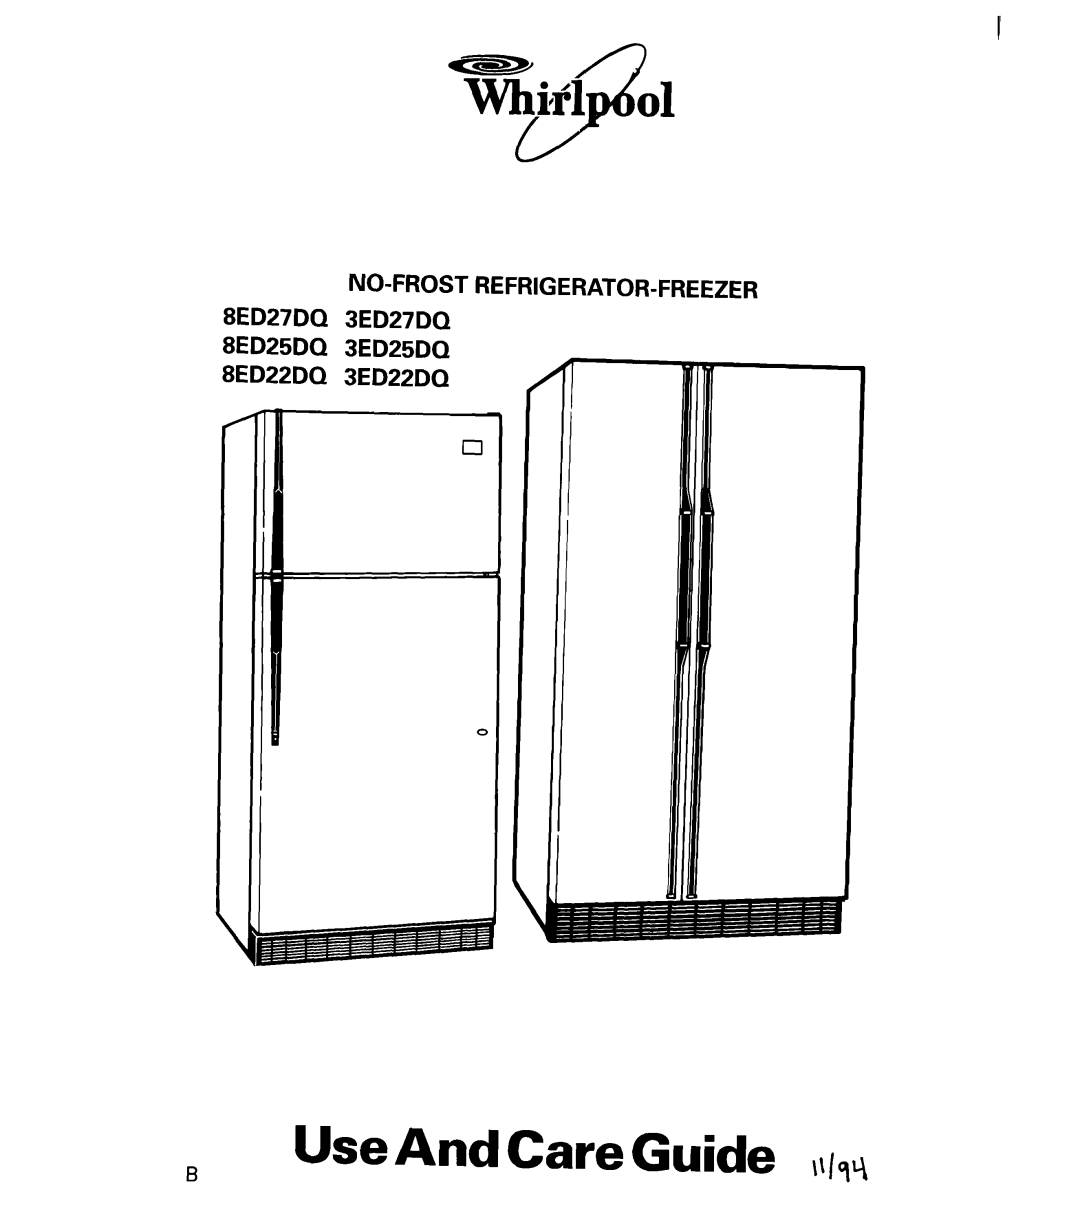 Whirlpool 8ED25DQ, 8ED22DQ, 3ED22DQ, 3ED25DQ manual BUse And Care Guide \\lqt, NO-FROST REFRIGERATOR-FREEZER 8ED27DQ 3ED27DQ 